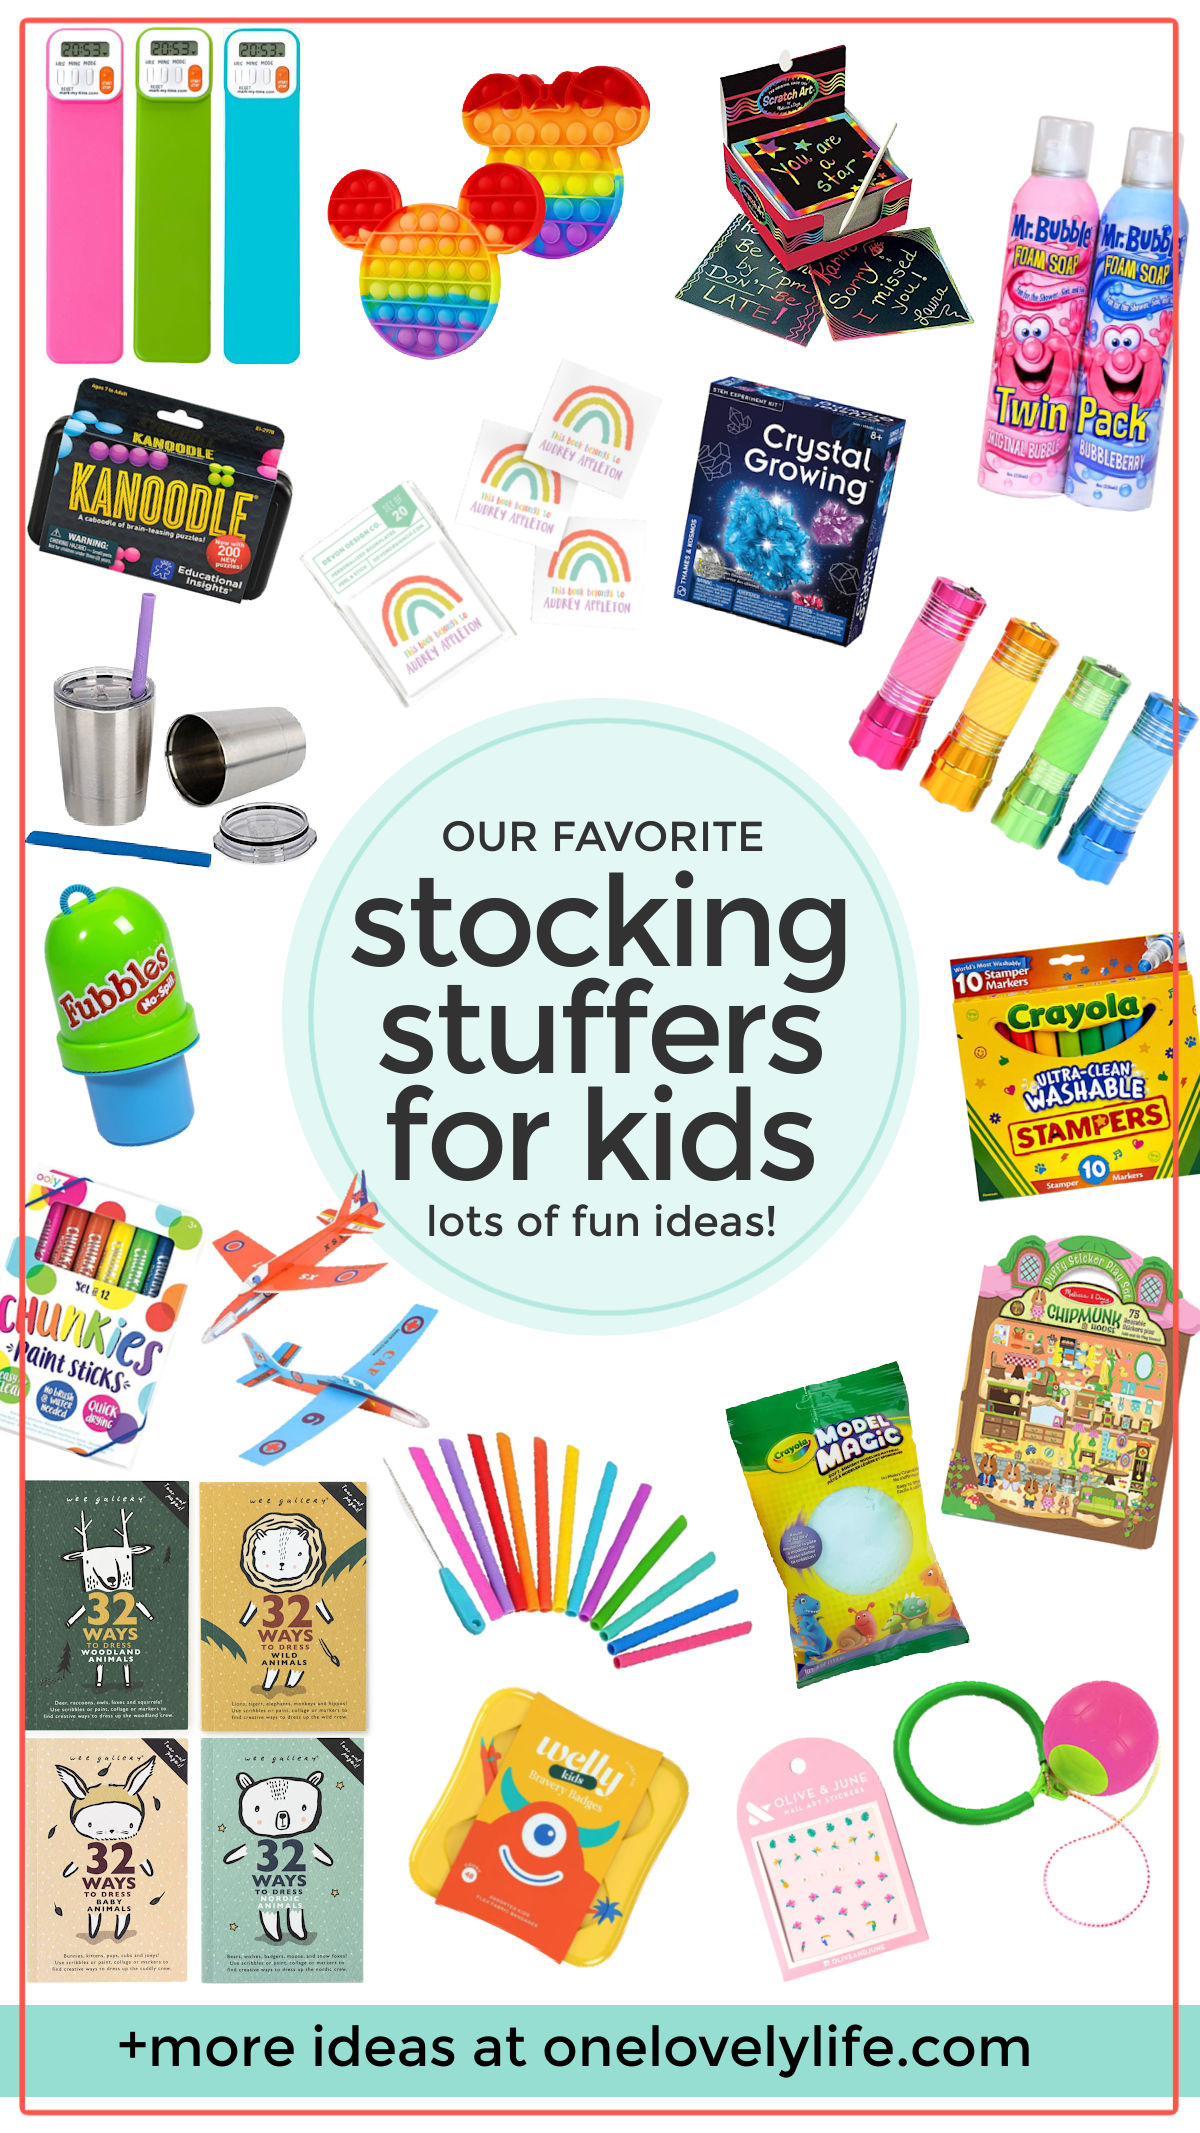 Creative Kids Stocking Stuffers with text overlay that reads "30 awesome stocking stuffers for kids"